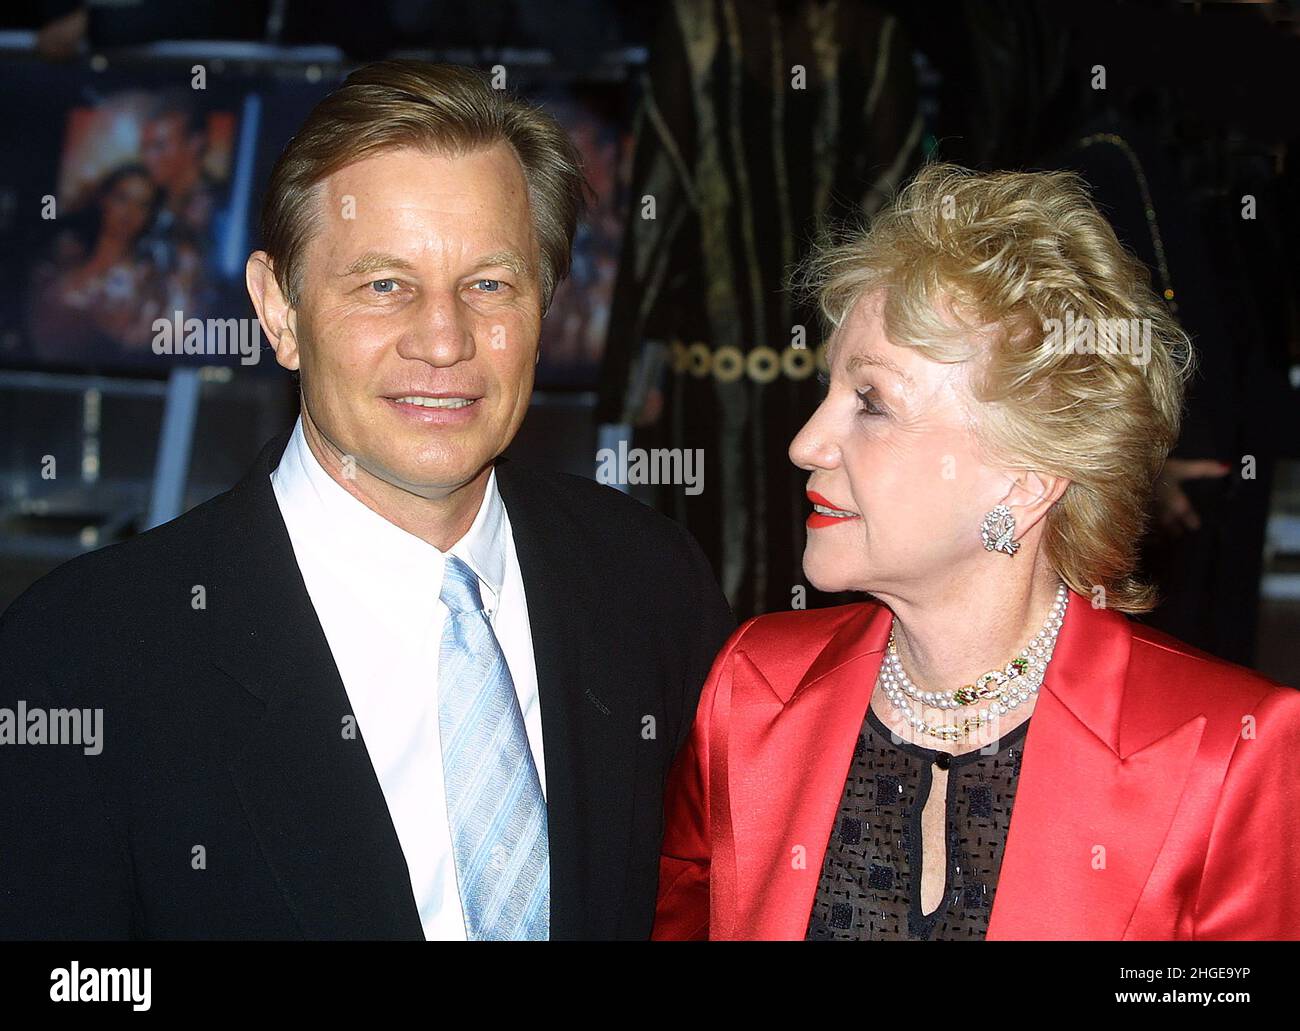 Michael York and Patricia McCallum at the Star Wars premiere at Leicester Square  April 2002 Stock Photo